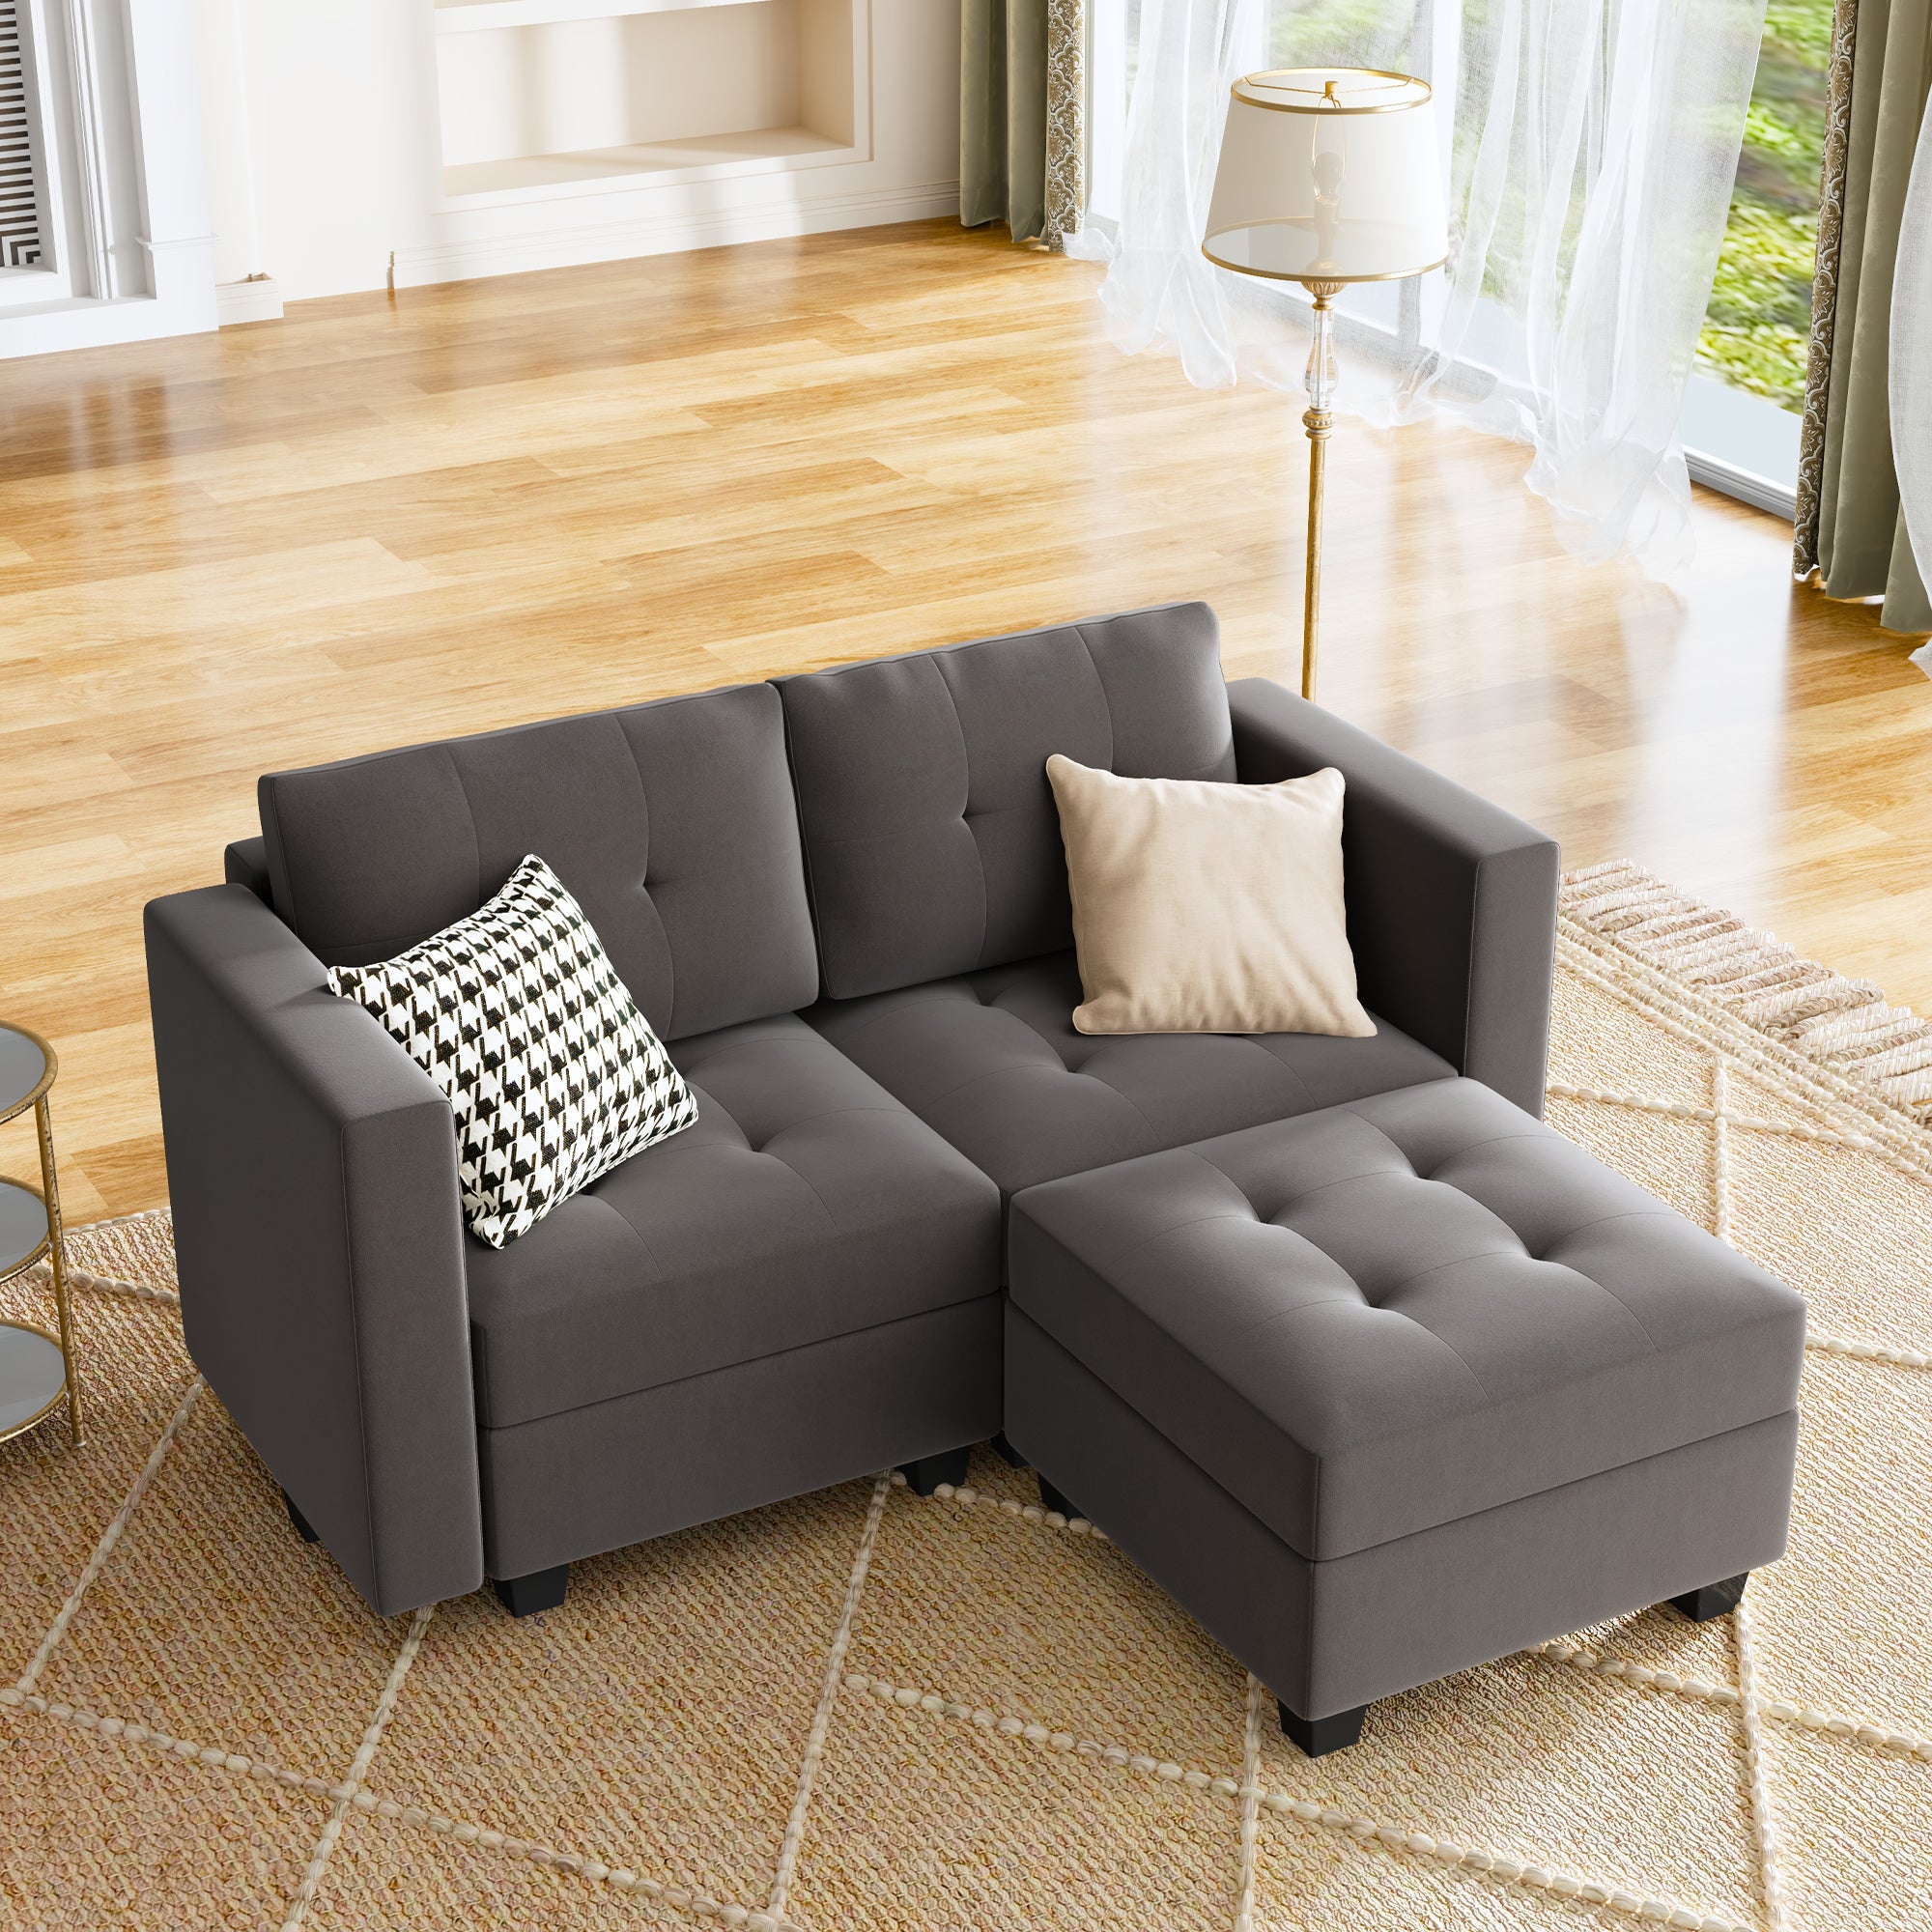 HONBAY Tufted Modular Sofa 2-Seat+1-Side Armrest+1-Ottoman with Storage Seater